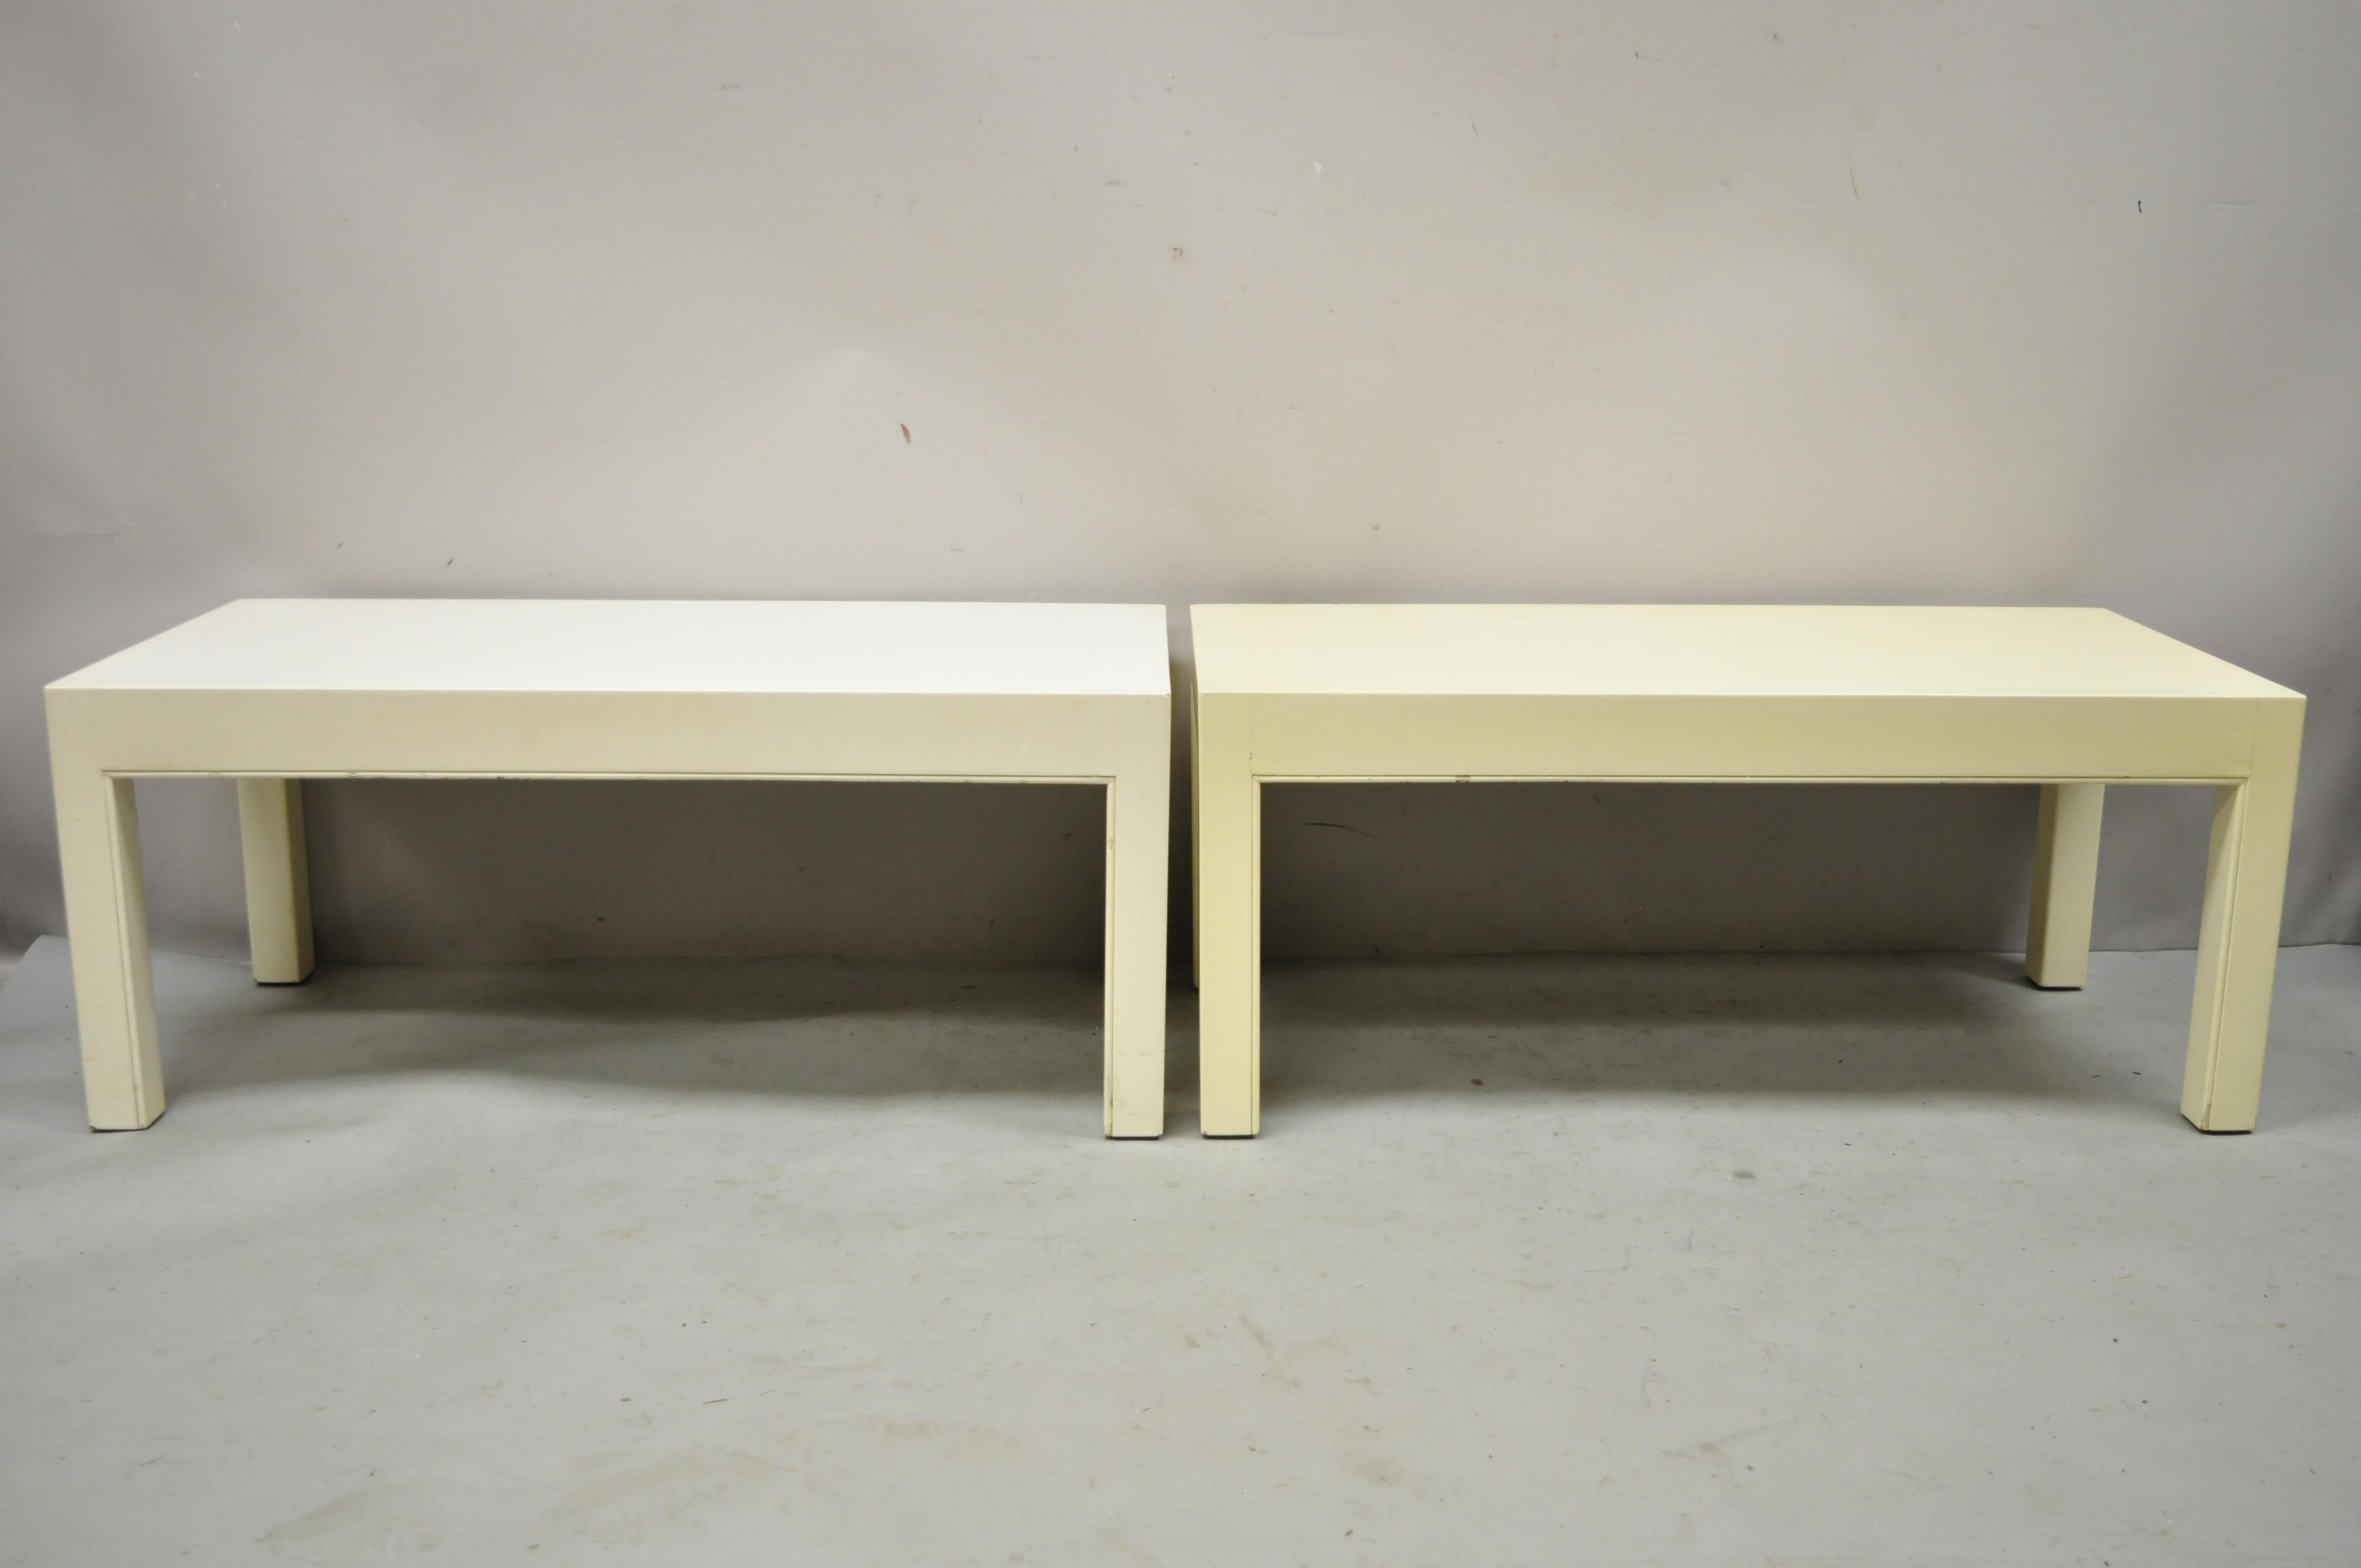 Vintage Modern Solid Wood Cream Lacquered Parsons Low Pedestal Side Tables - a Pair. Item features solid wood construction, cream/white lacquer finish, solid wood construction, very nice vintage item, clean modernist lines, quality craftsmanship.